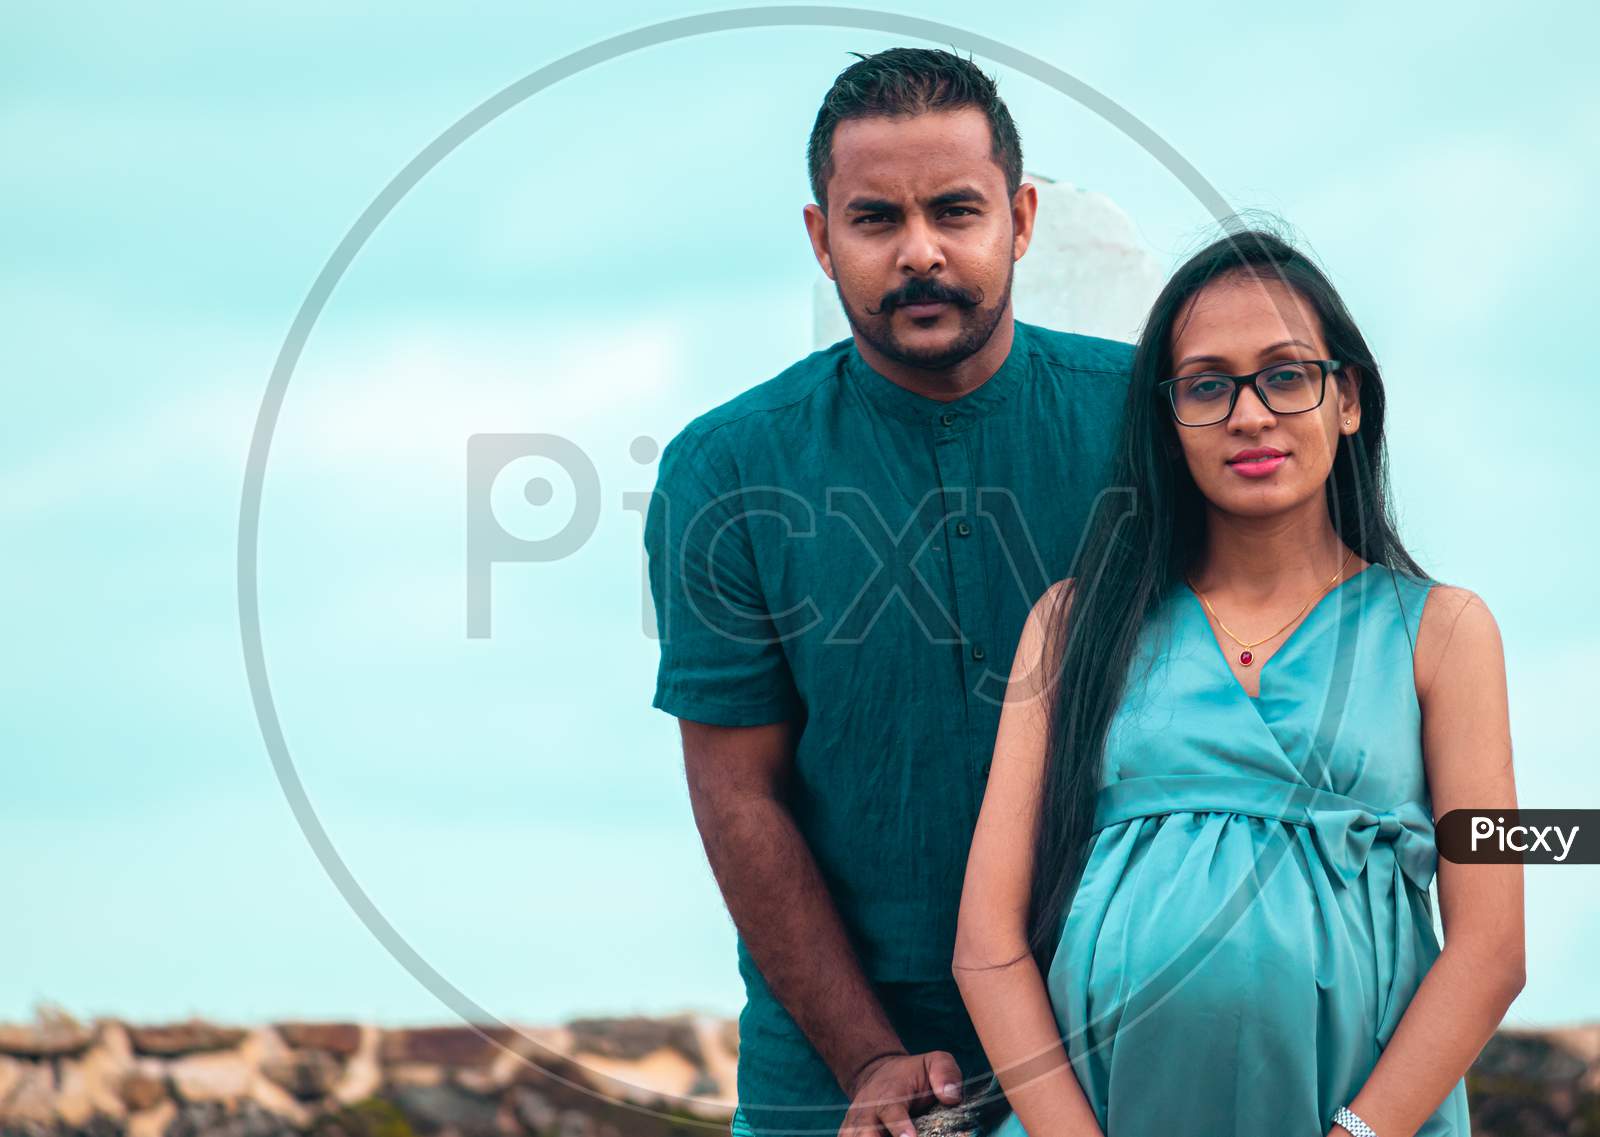 The Pregnant Young Lady And Her Handsome Husband Portrait, Under The Blue Skies Natural Lighting Conditions In Galle Fort, South Asian Young Couple.